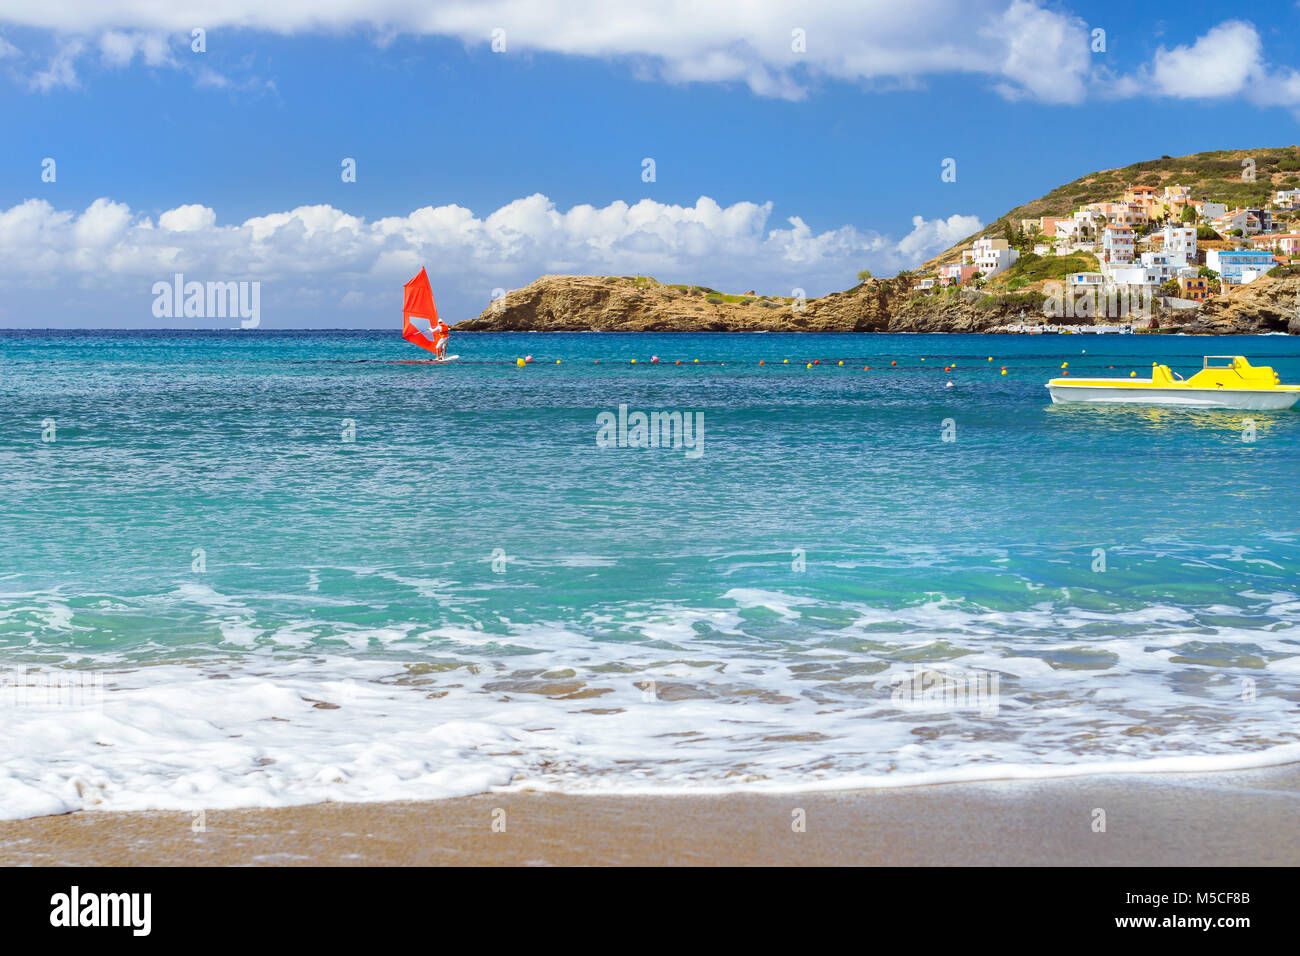 Windsurf with red sail rides on sea on background rocky shore. View from sunny Livadi beach in resort village Bali. Rethymno, Crete Greece. Extreme wa Stock Photo